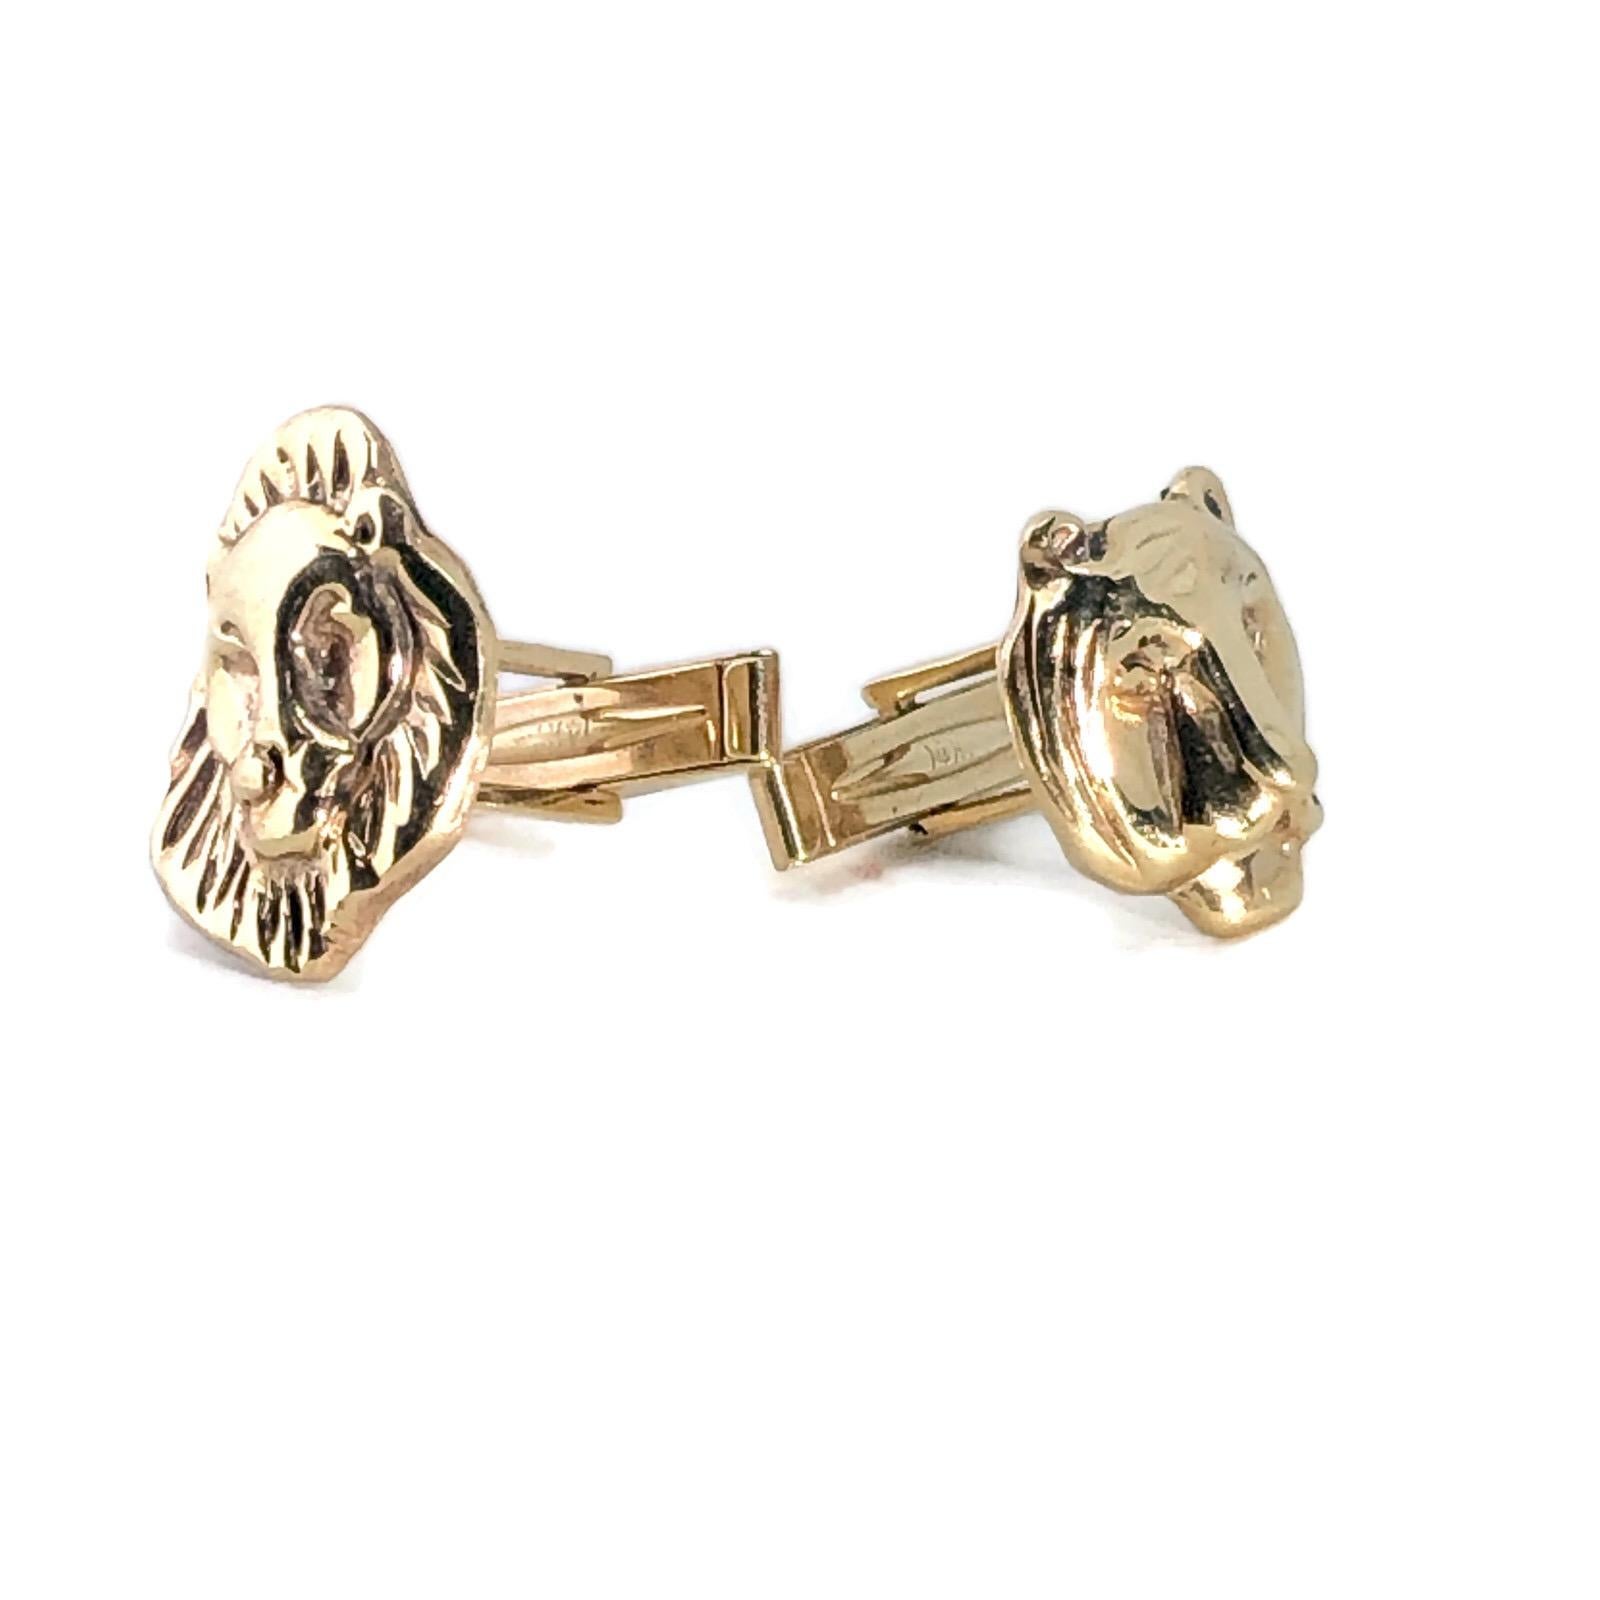 Vintage Unisex Cufflinks in Lion and Lioness Design Made in 14 Karat Yellow Gold For Sale 2